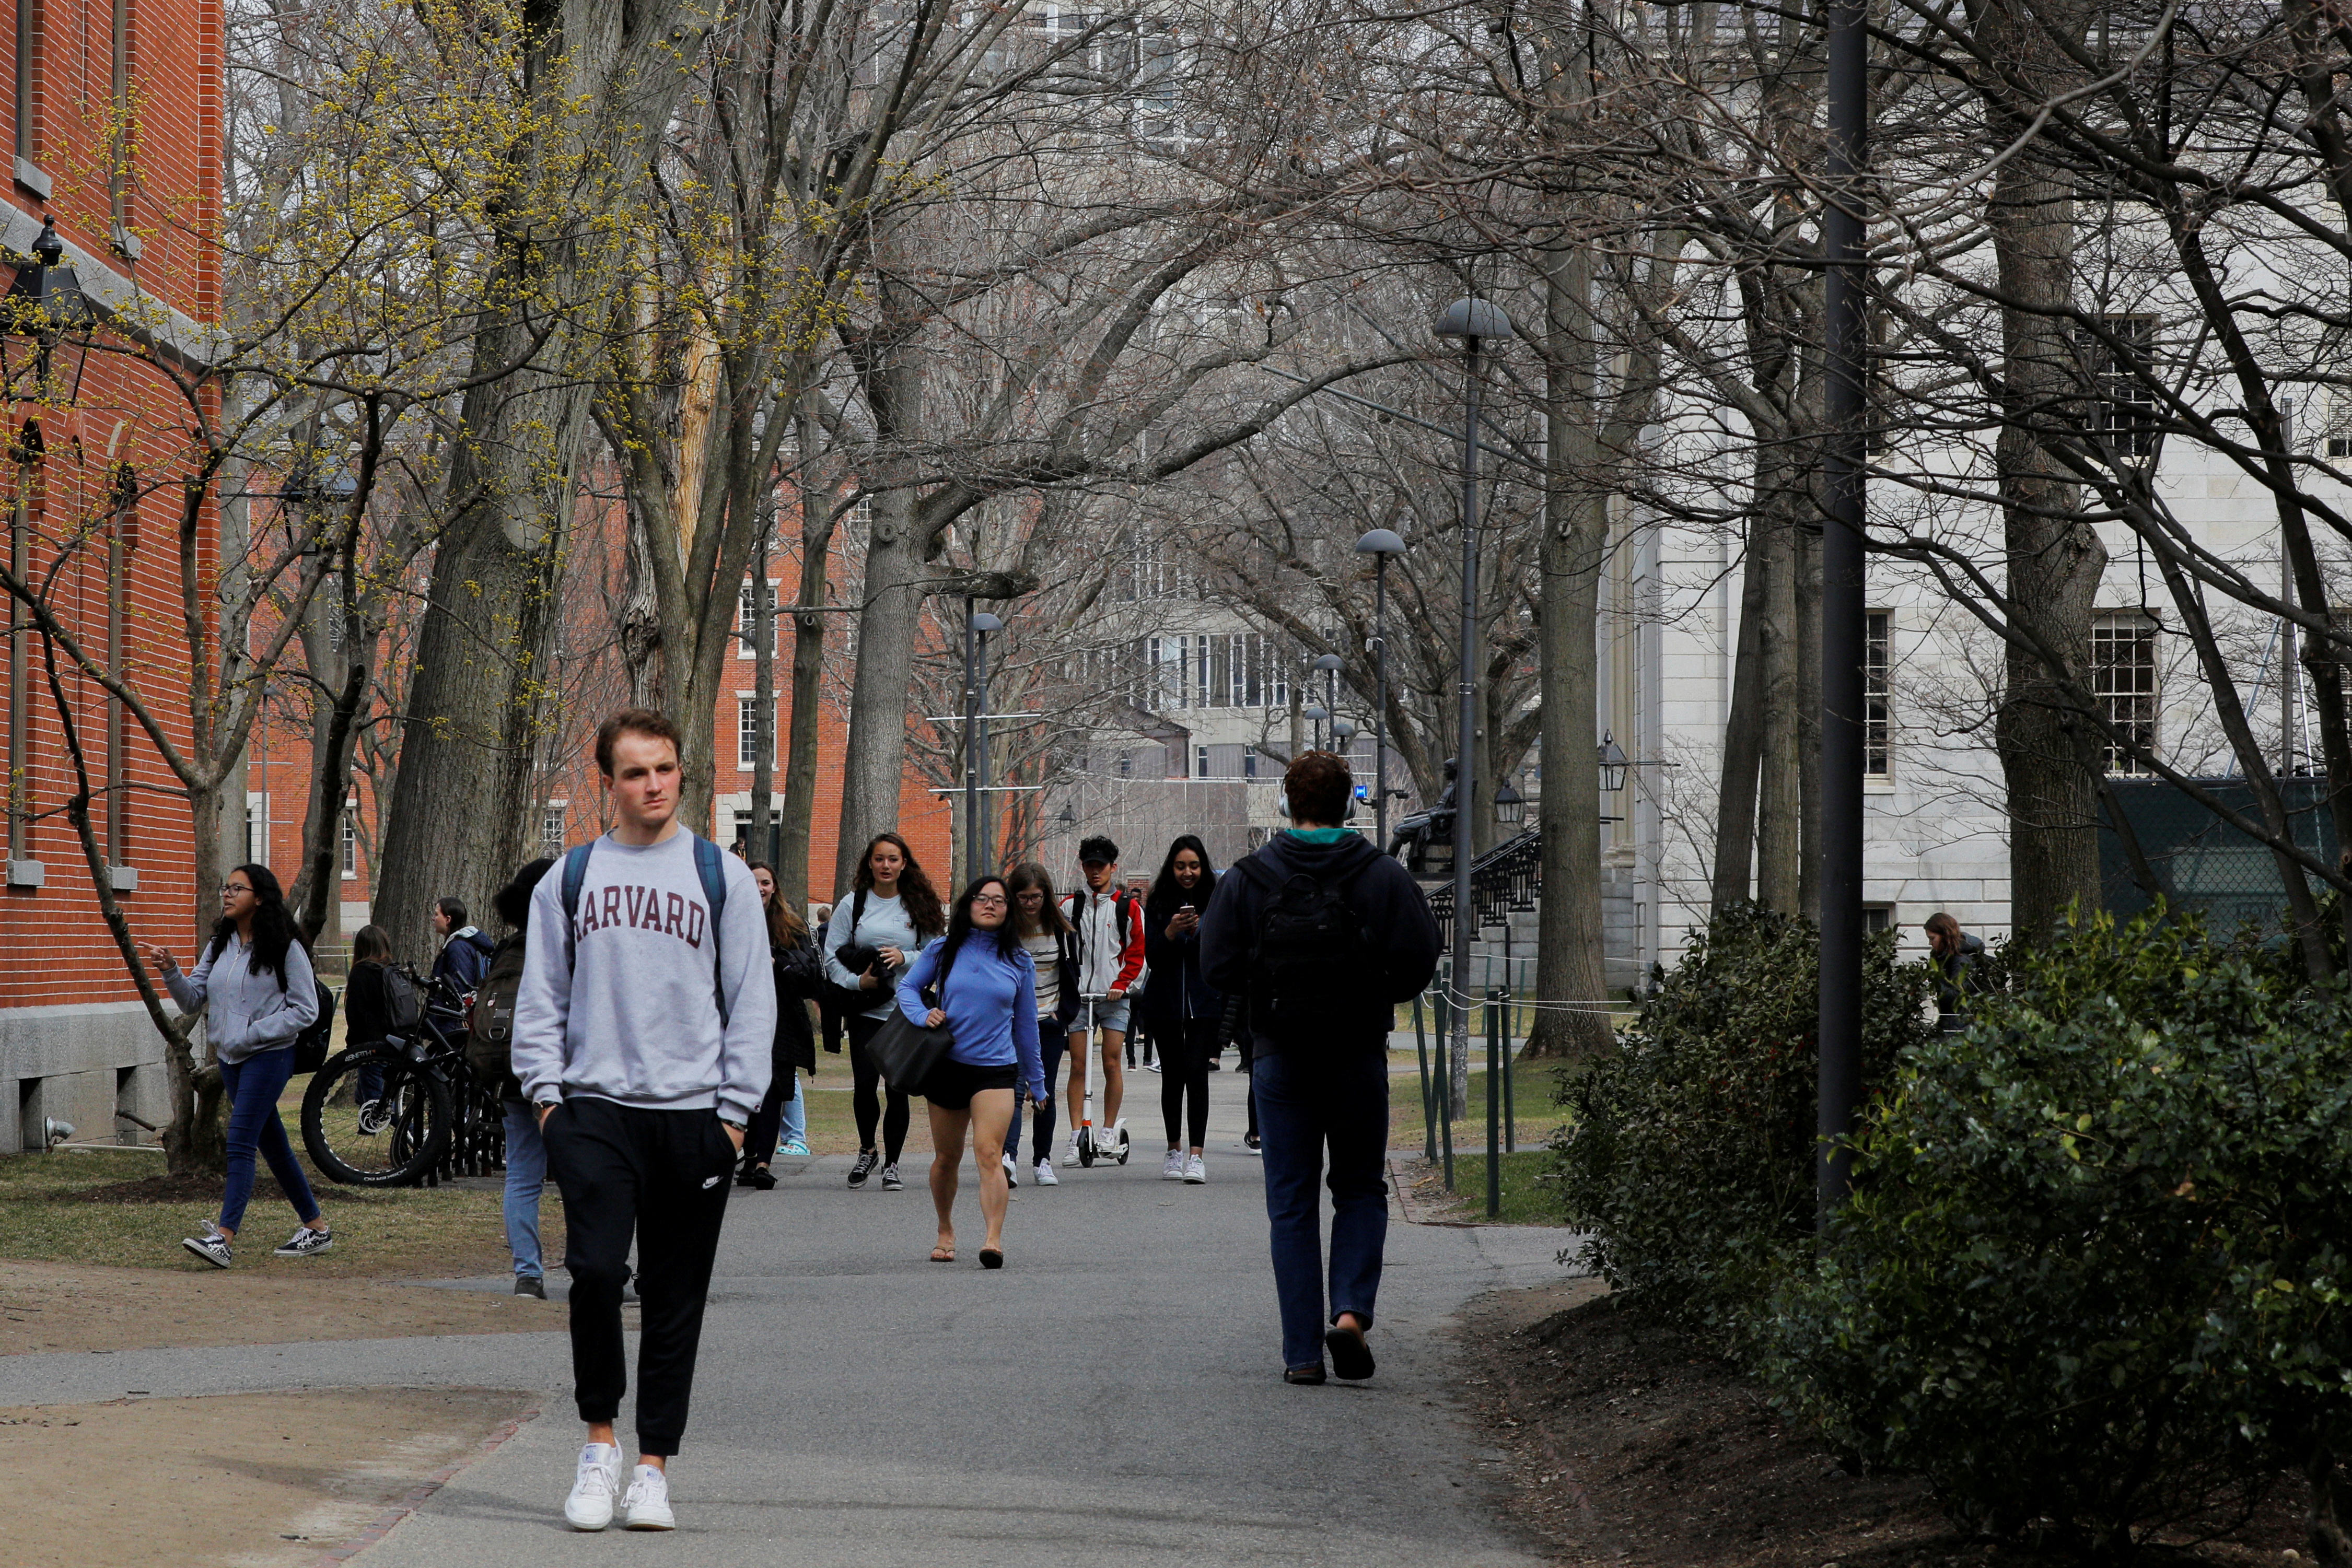 Students and pedestrians walk through the Yard at Harvard University in Cambridge